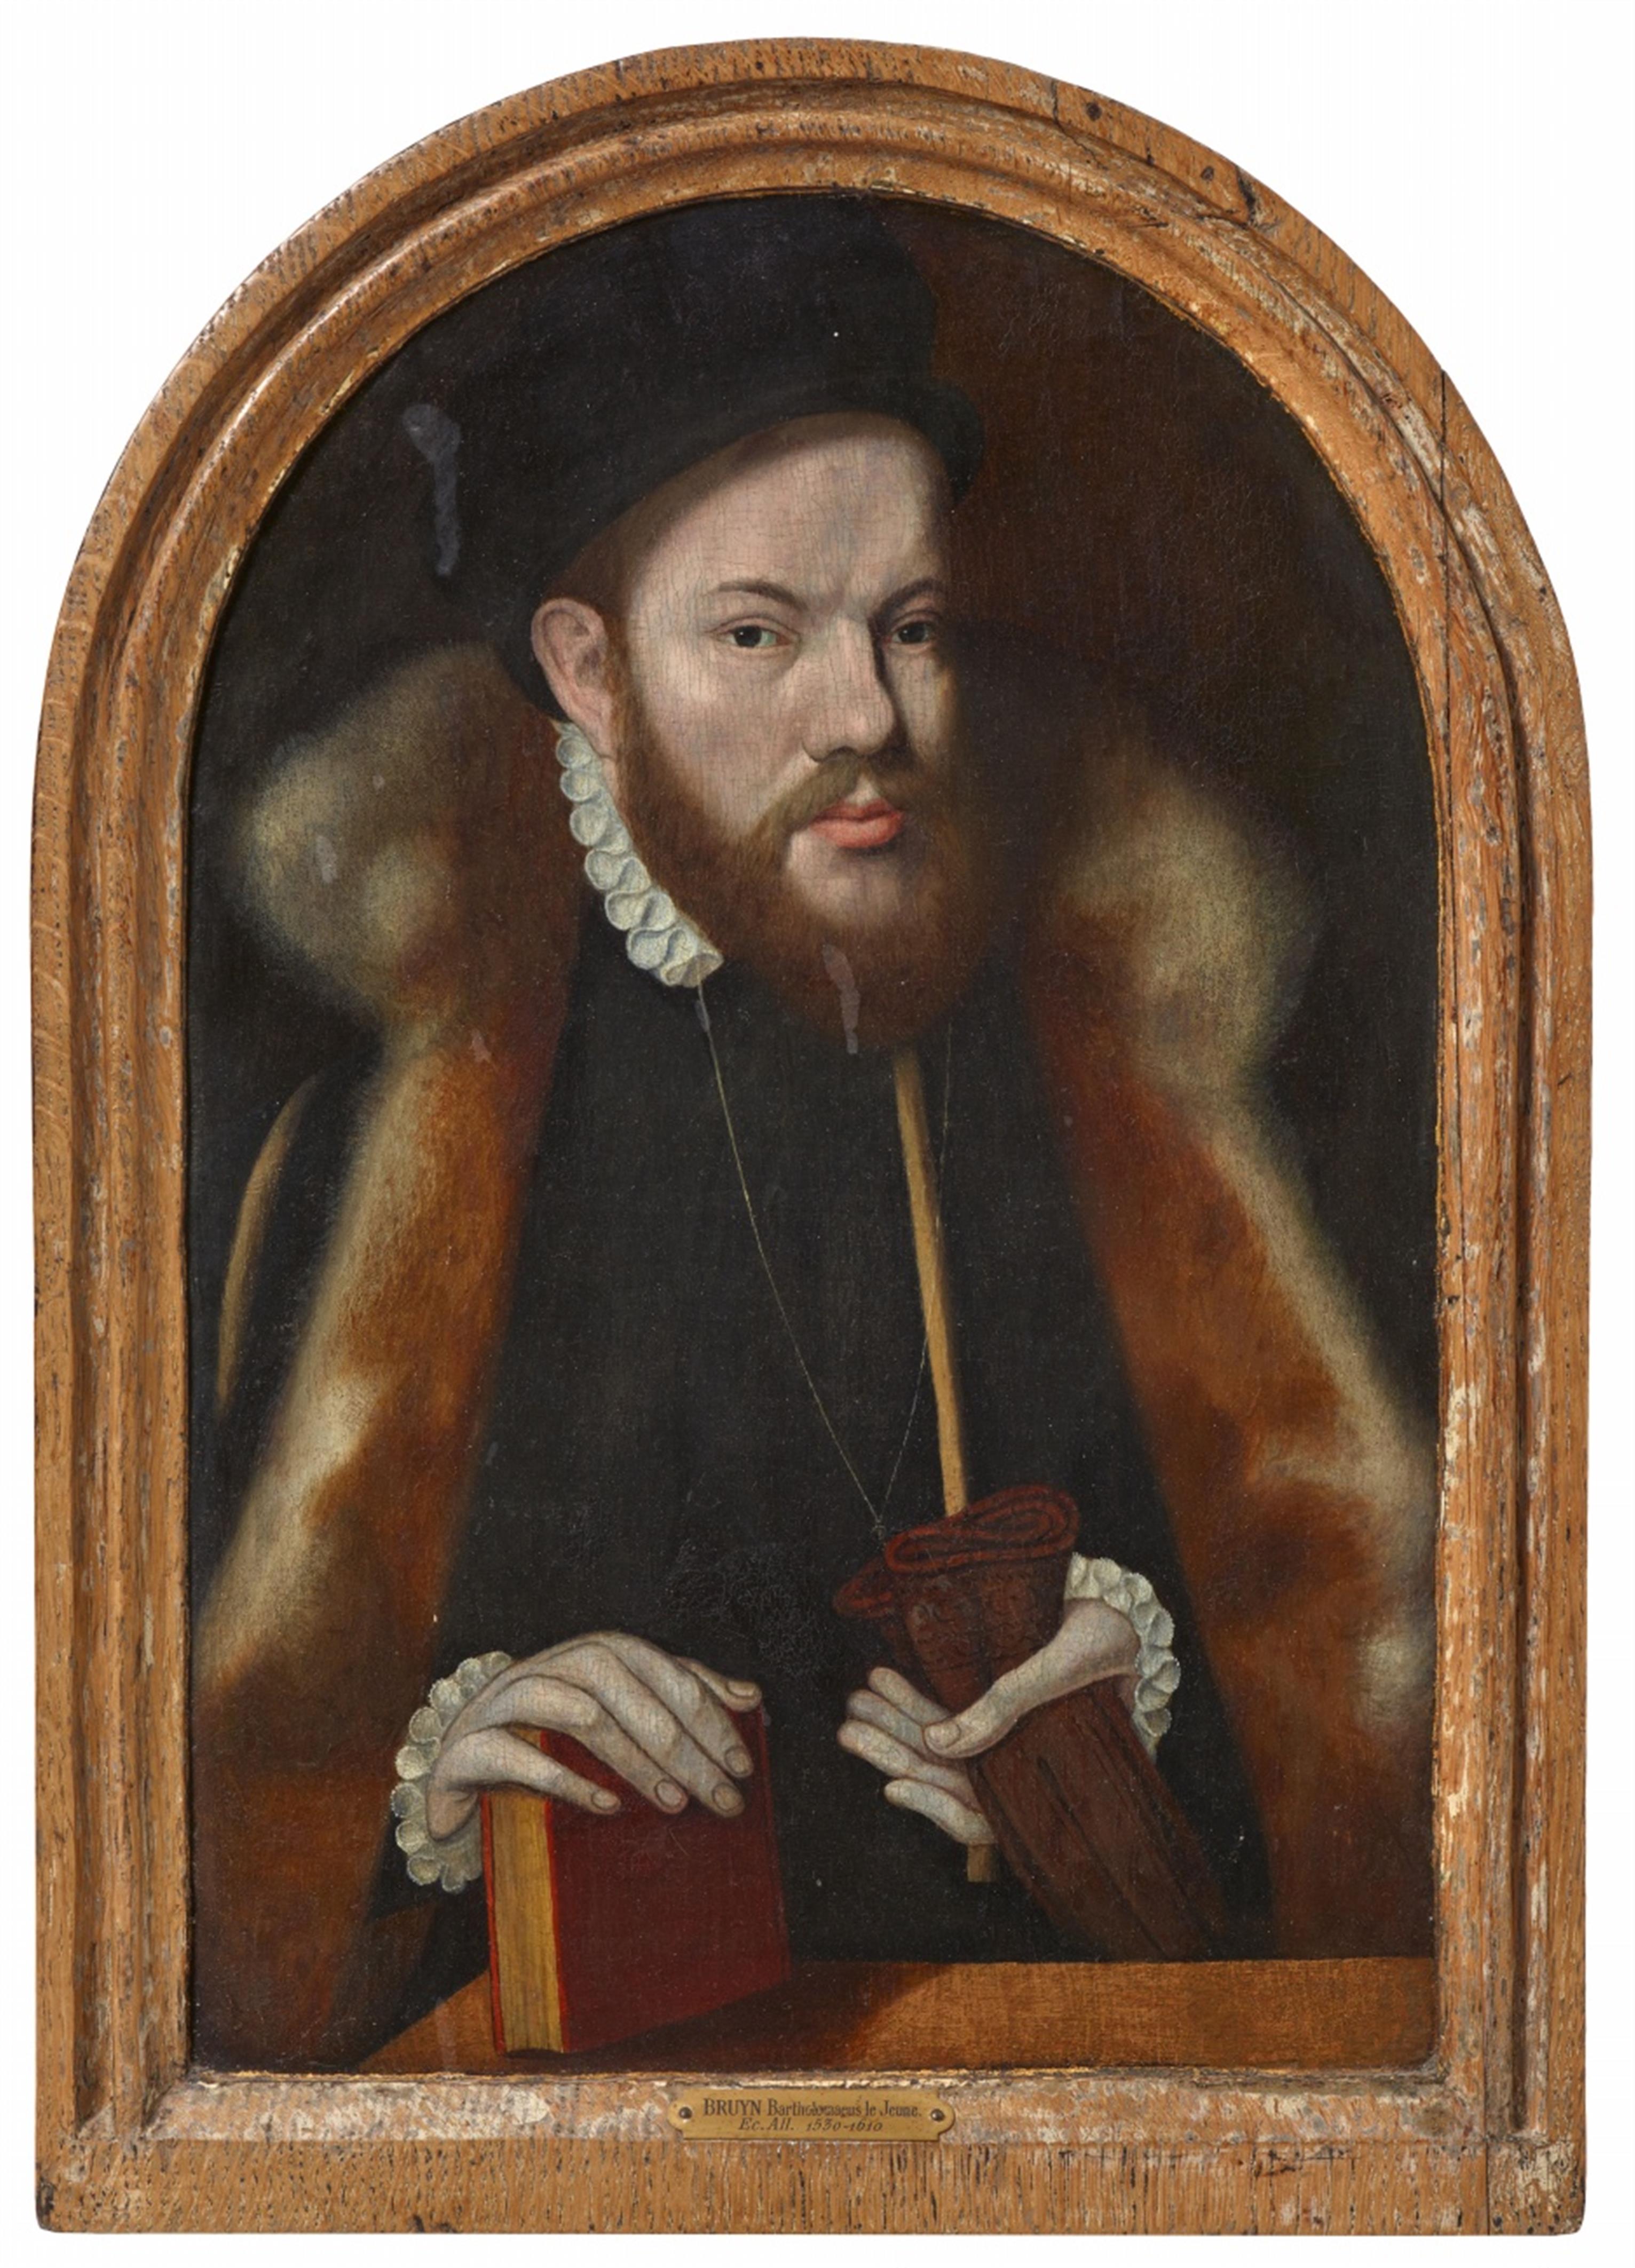 Cologne School early 15th century - Portrait of a Man in Fur Coat - image-1